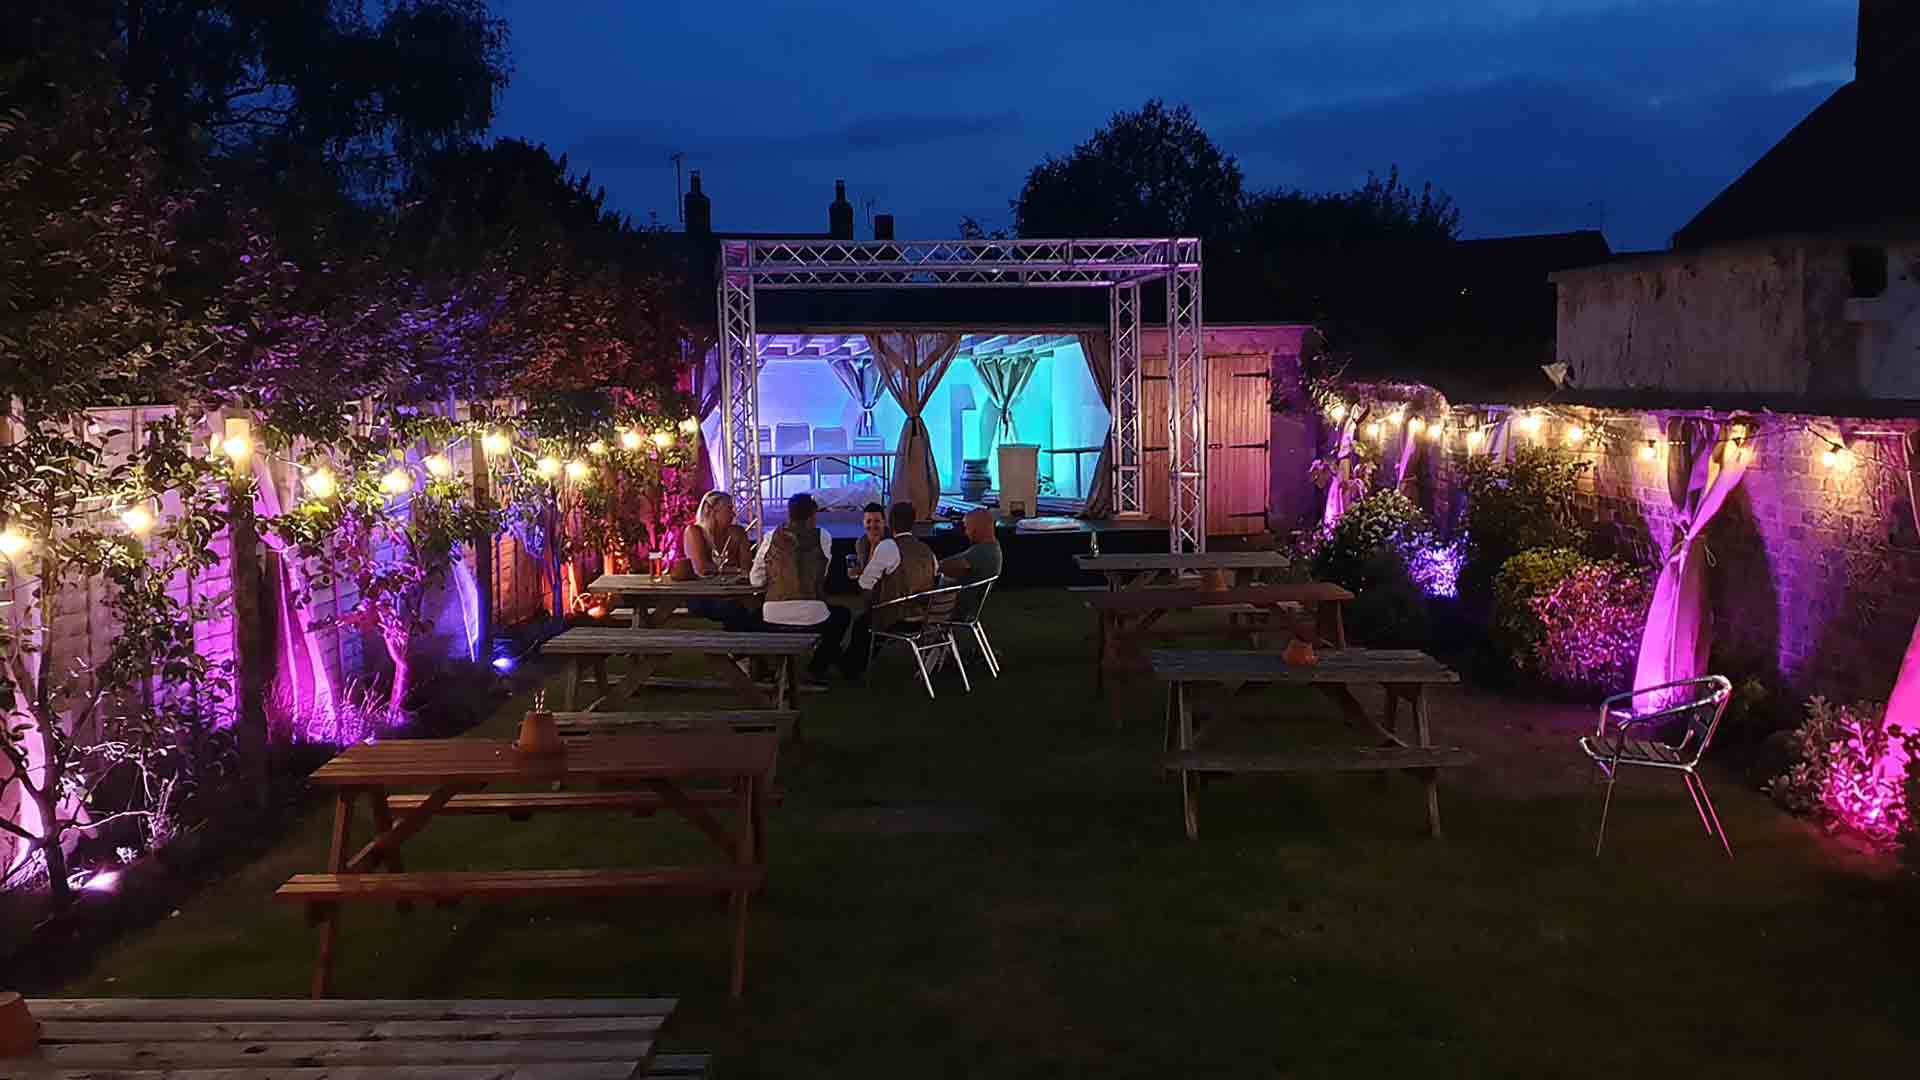 Festoon and Uplighter Lighting Creating a Colorful Ambiance for an Outdoor Wedding